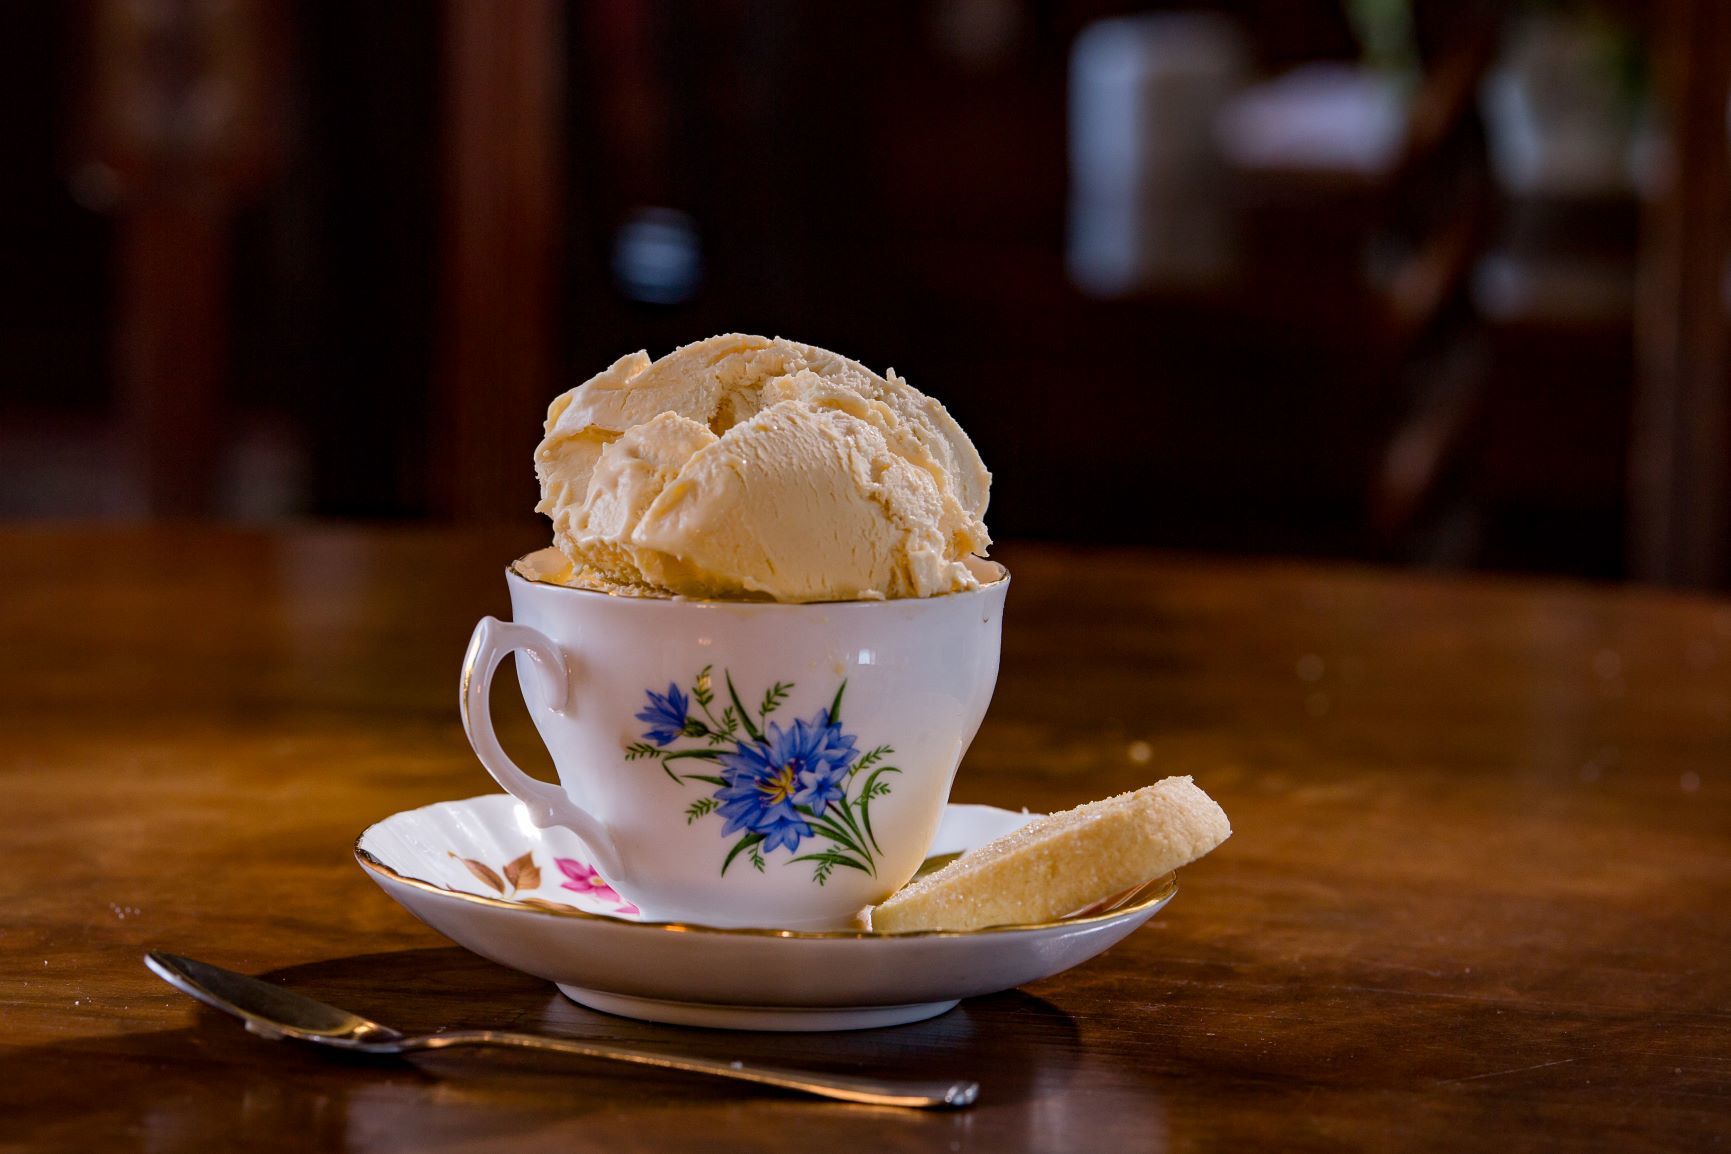 Ice cream made with soft fruit grown in the walled garden